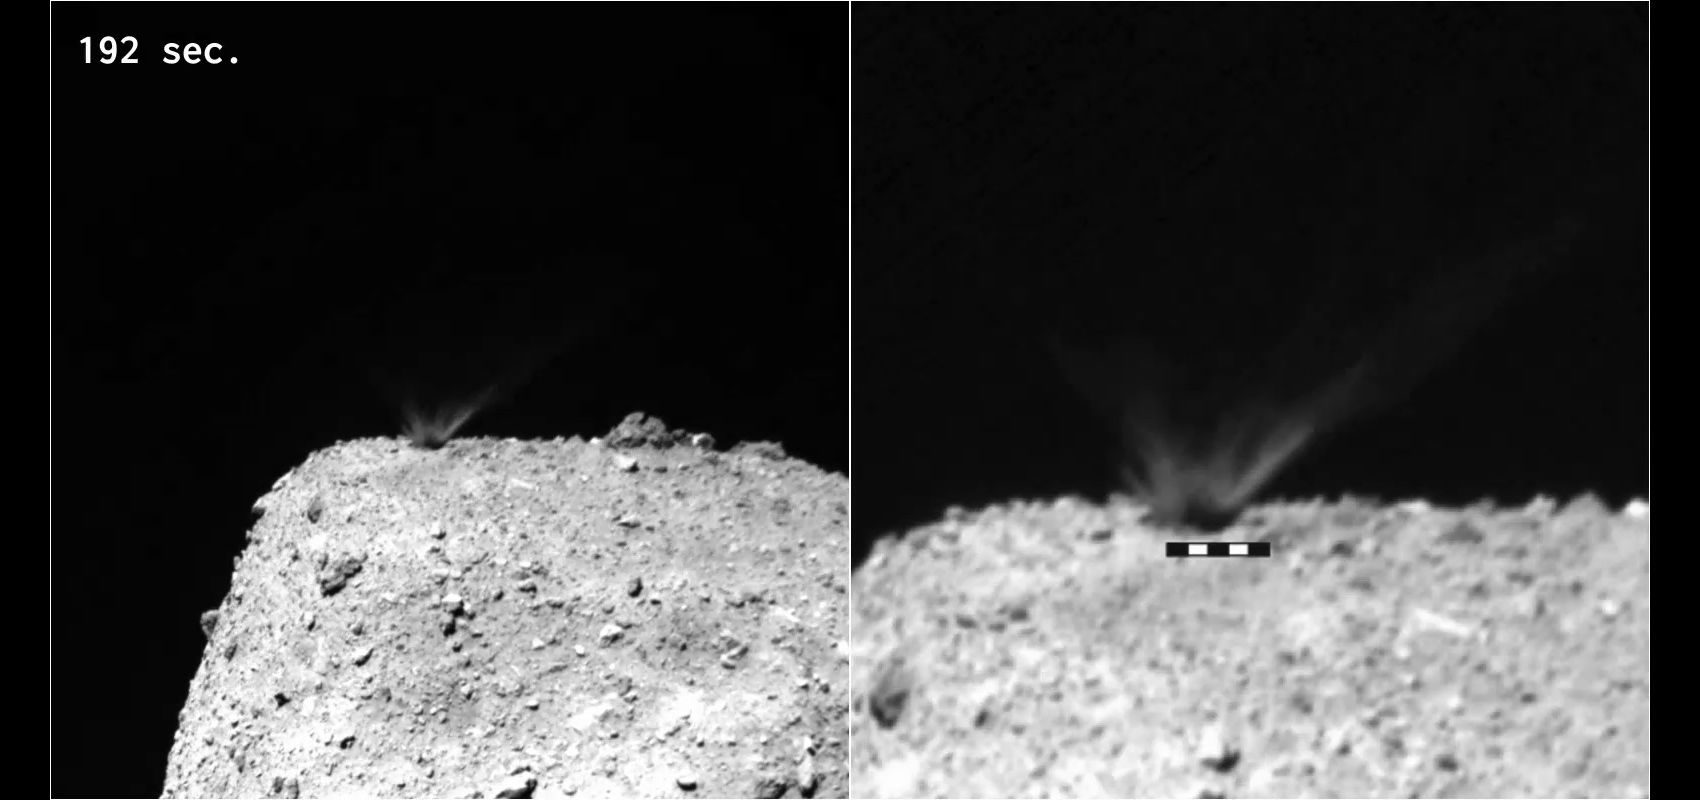 192 seconds after the impact of a slug shot by Hayabusa2 a crater forms on the asteroid Ryugu. Credit: Arakawa et al.